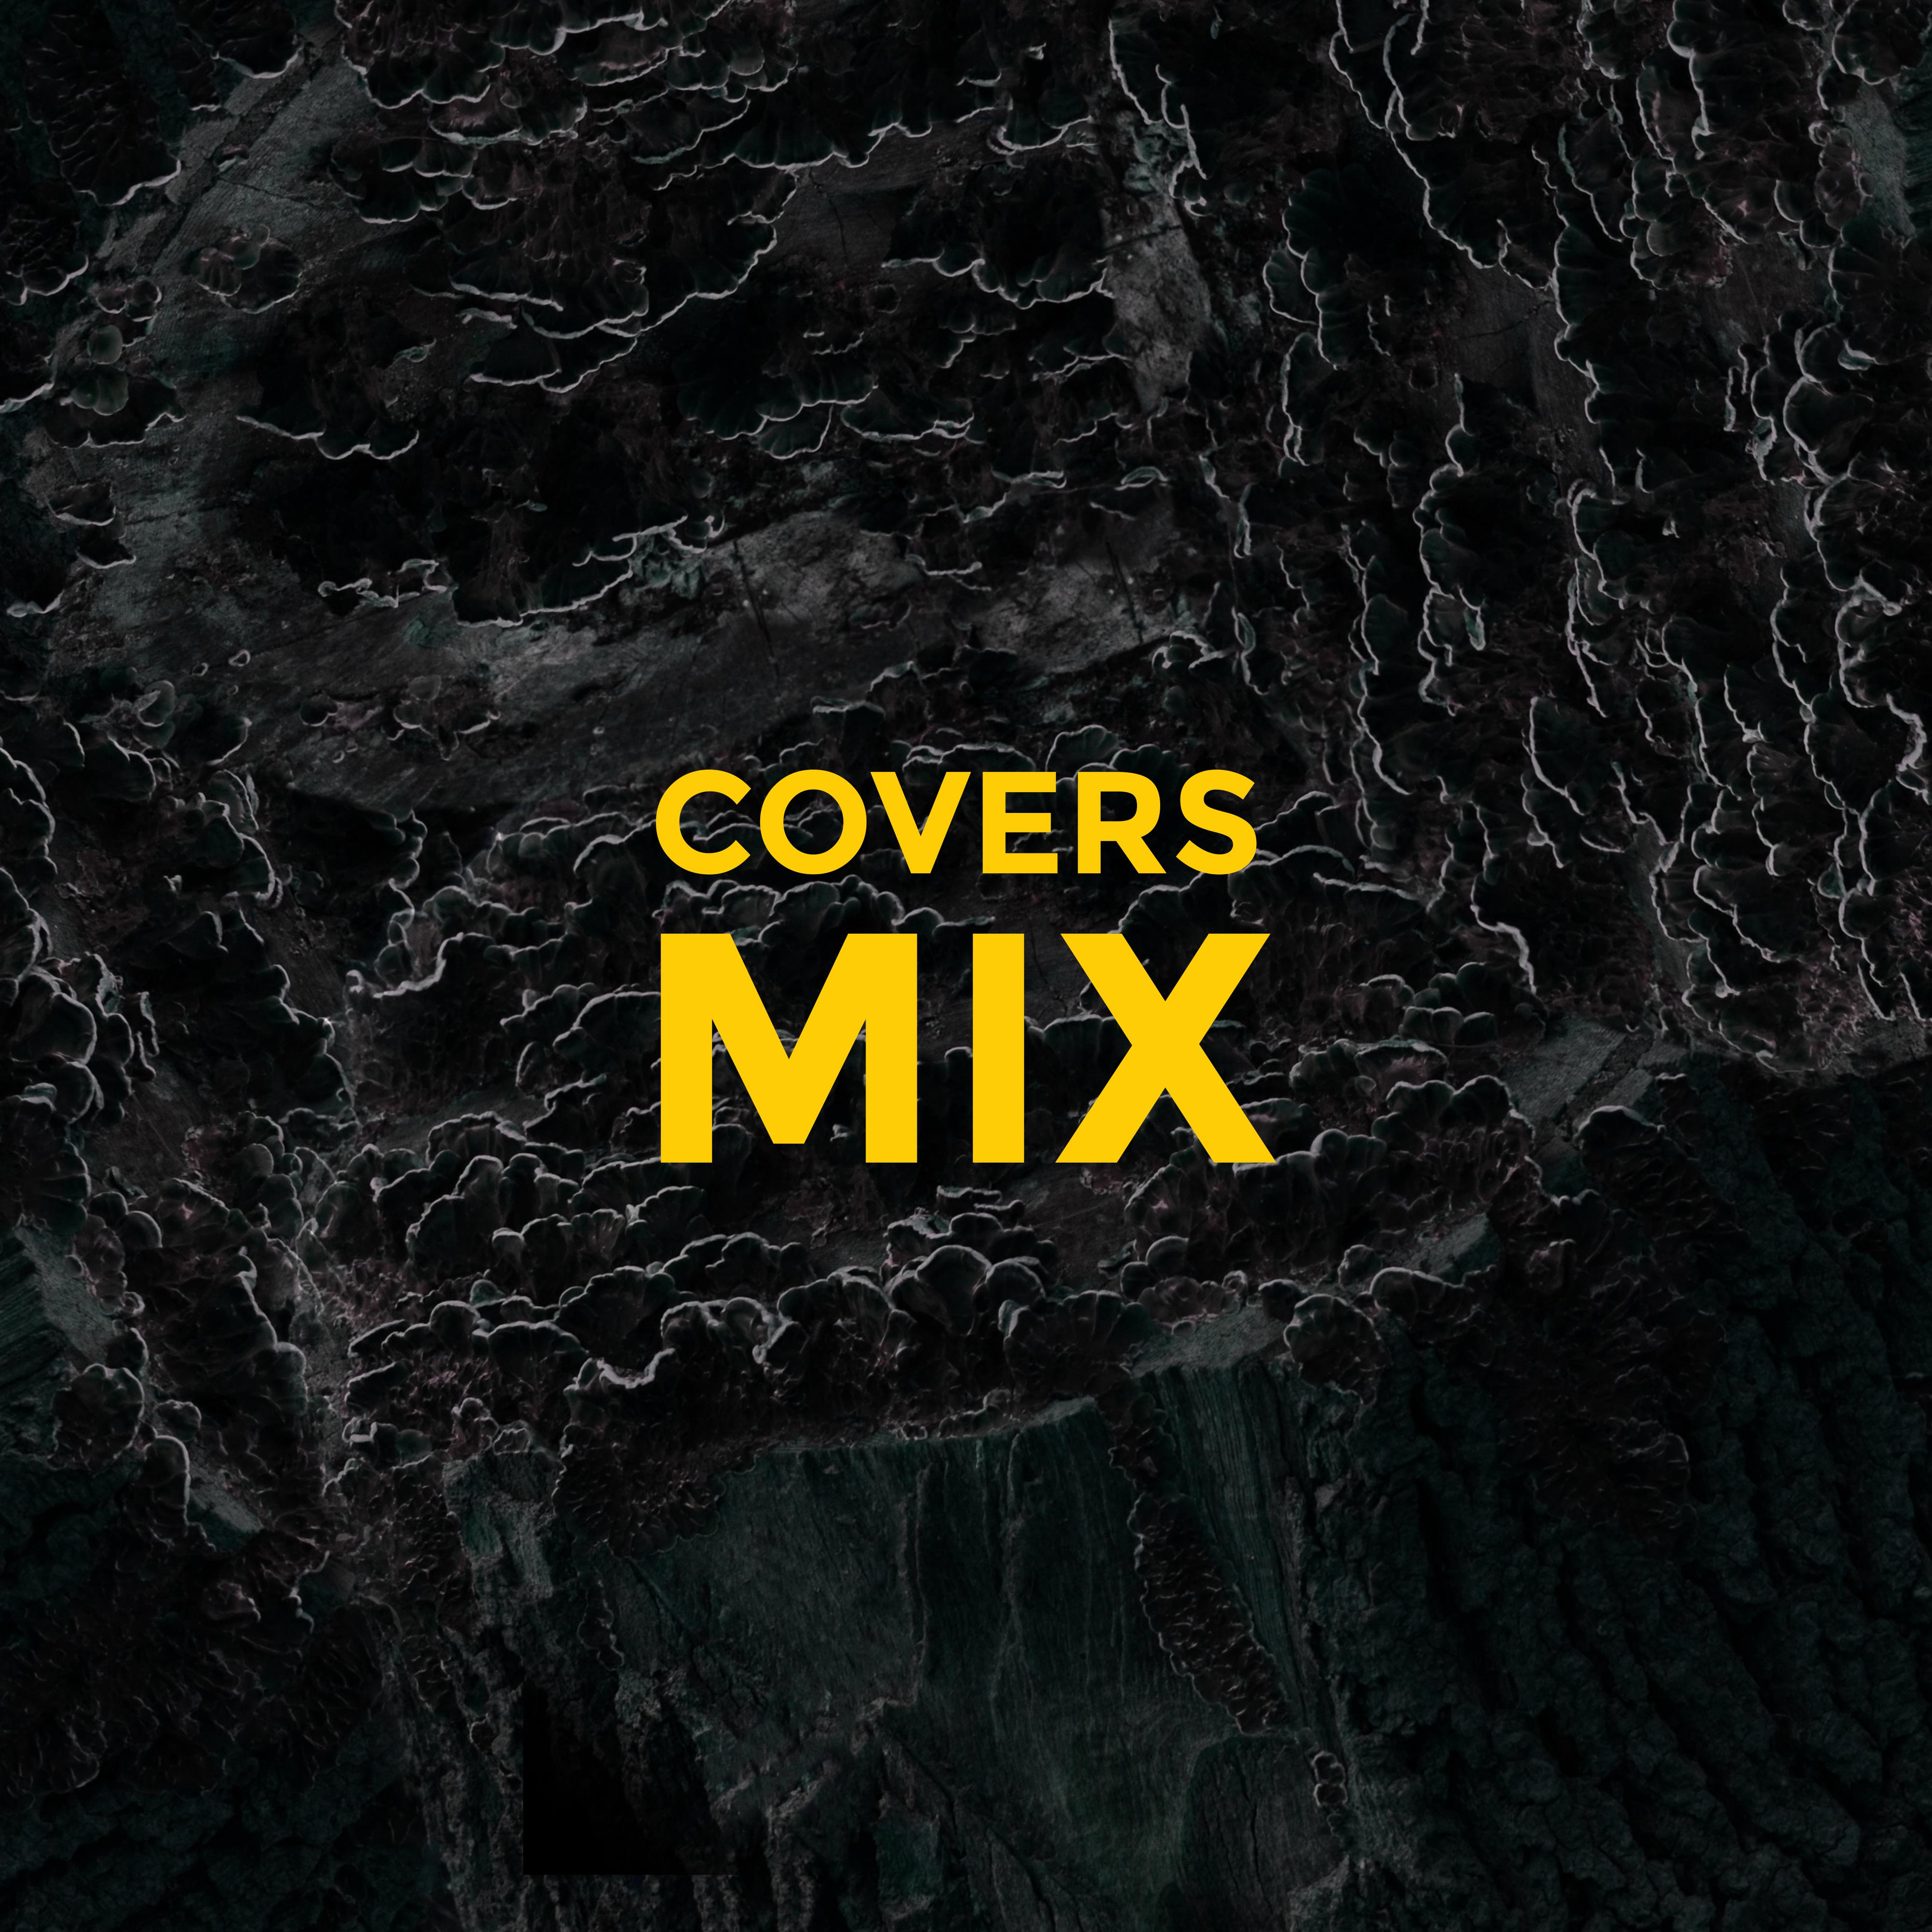 Covers Mix – Instrumental Sounds for Relaxation, Ambient Music